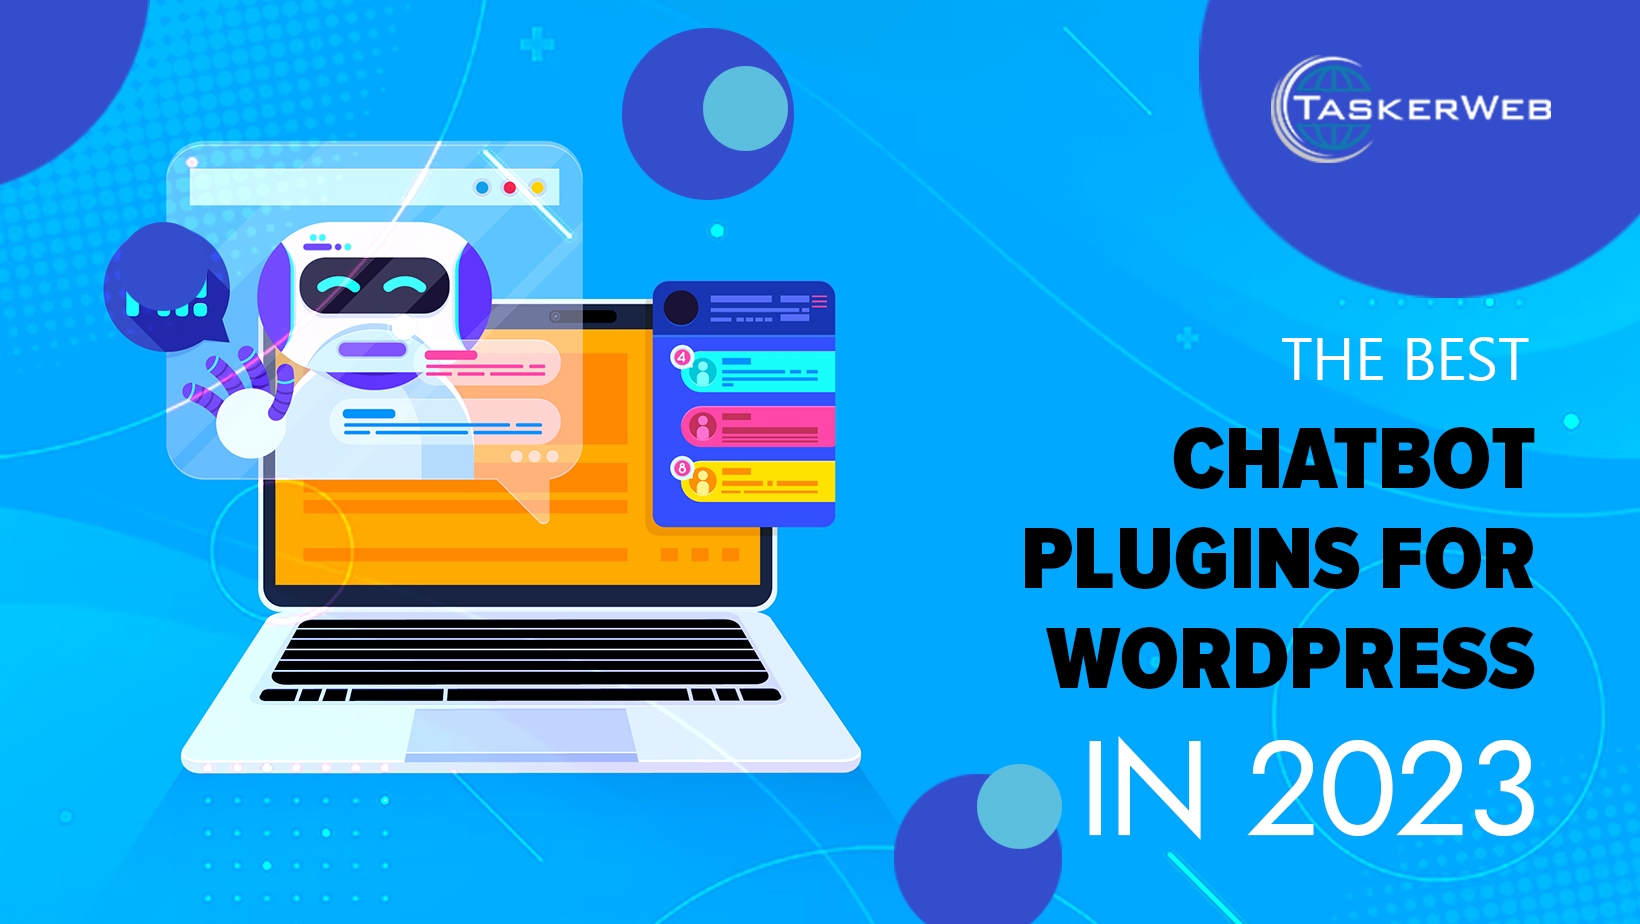 The Best Chatbot Plugins For WordPress In 2023